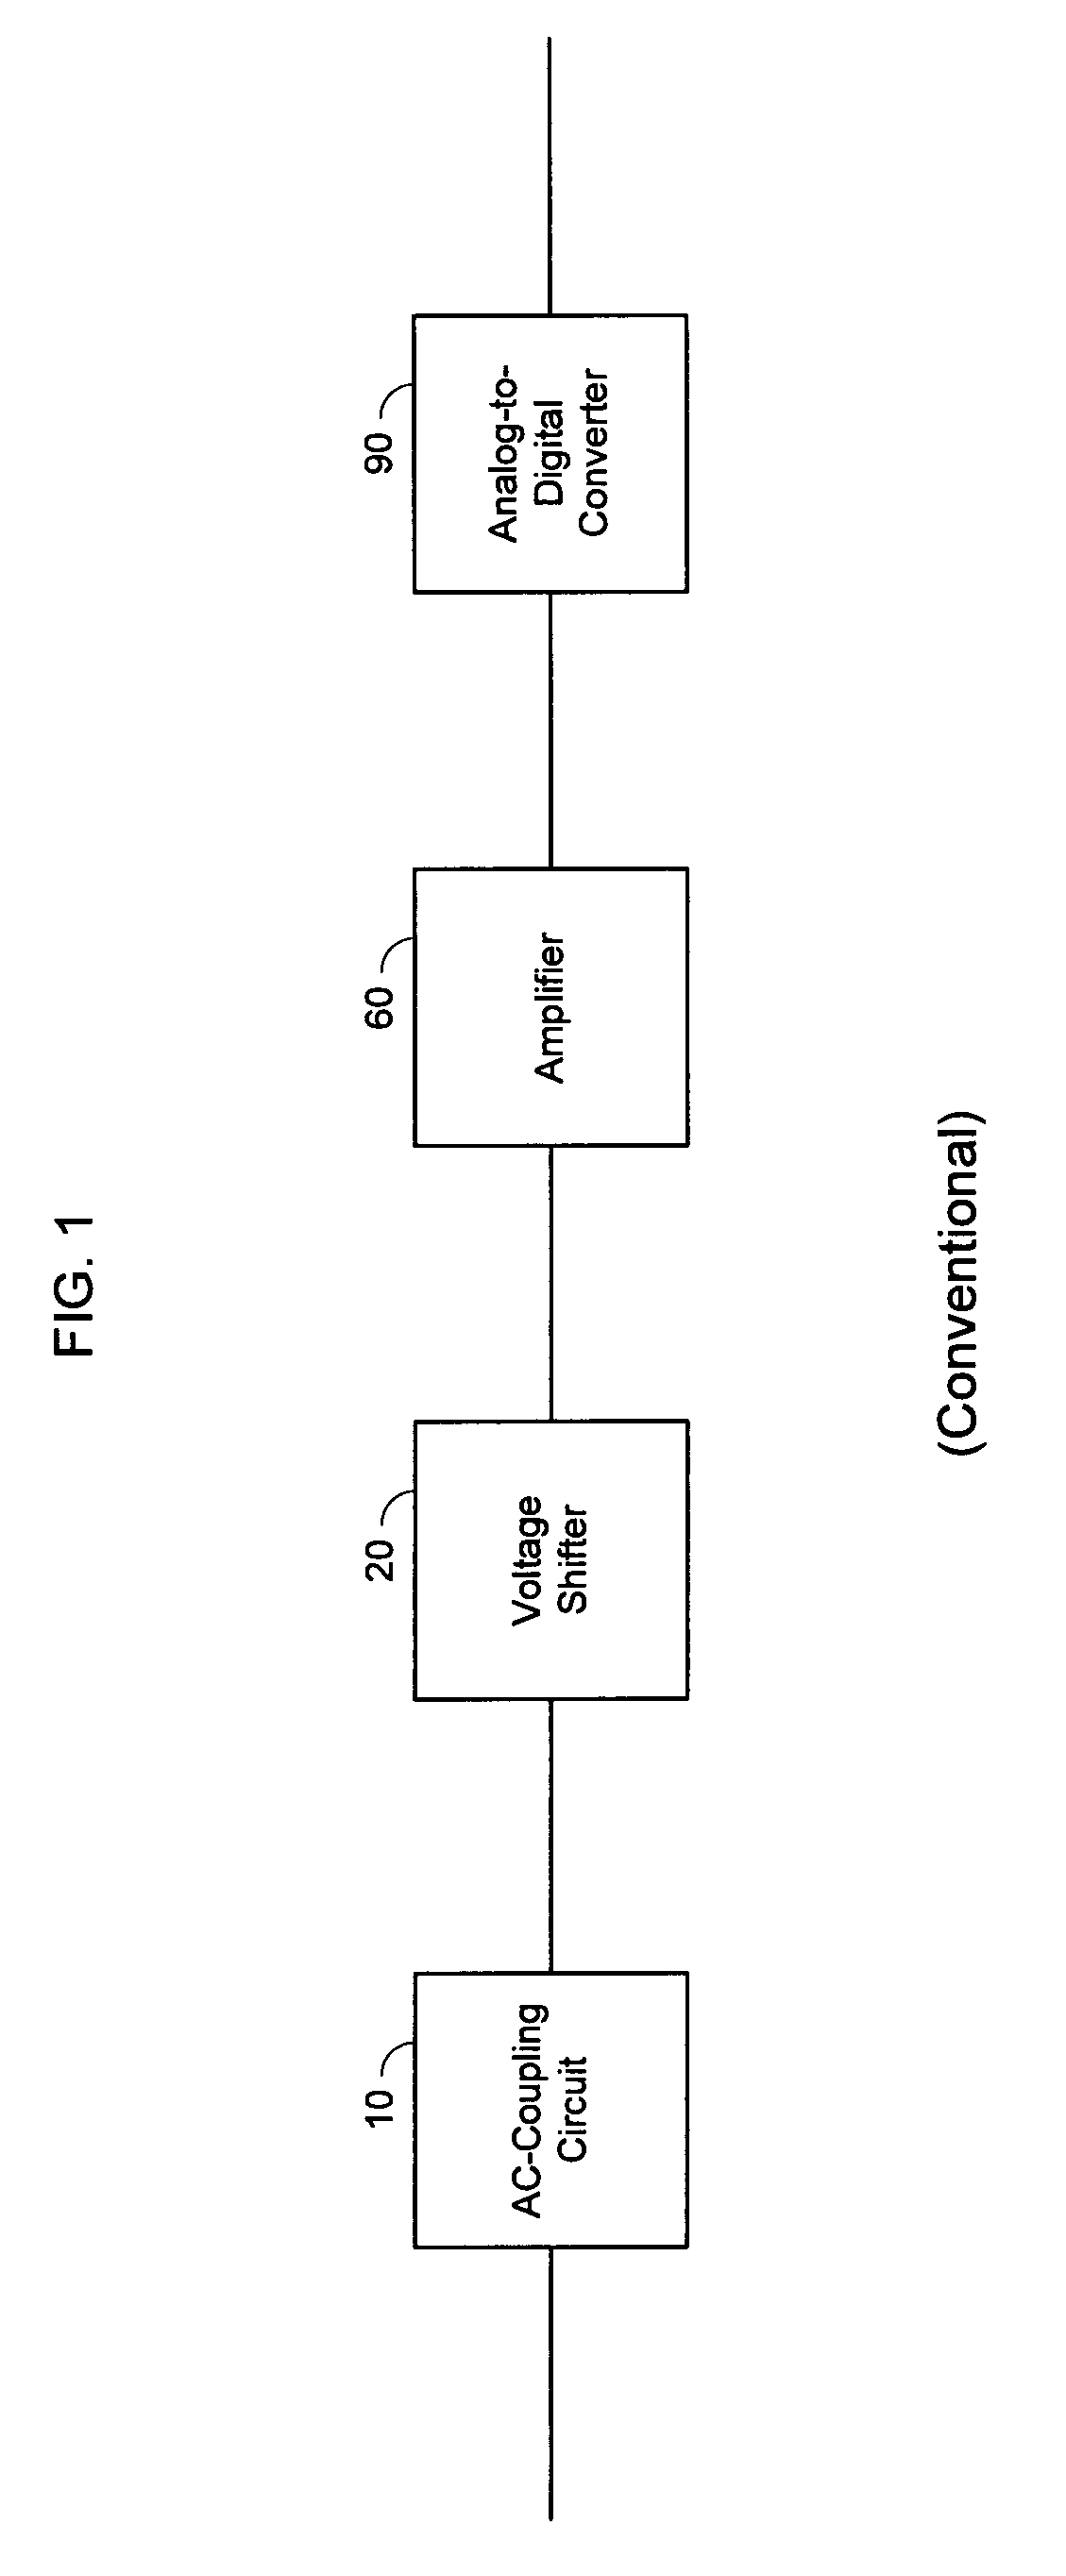 Apparatus, method, and system for correction of baseline wander